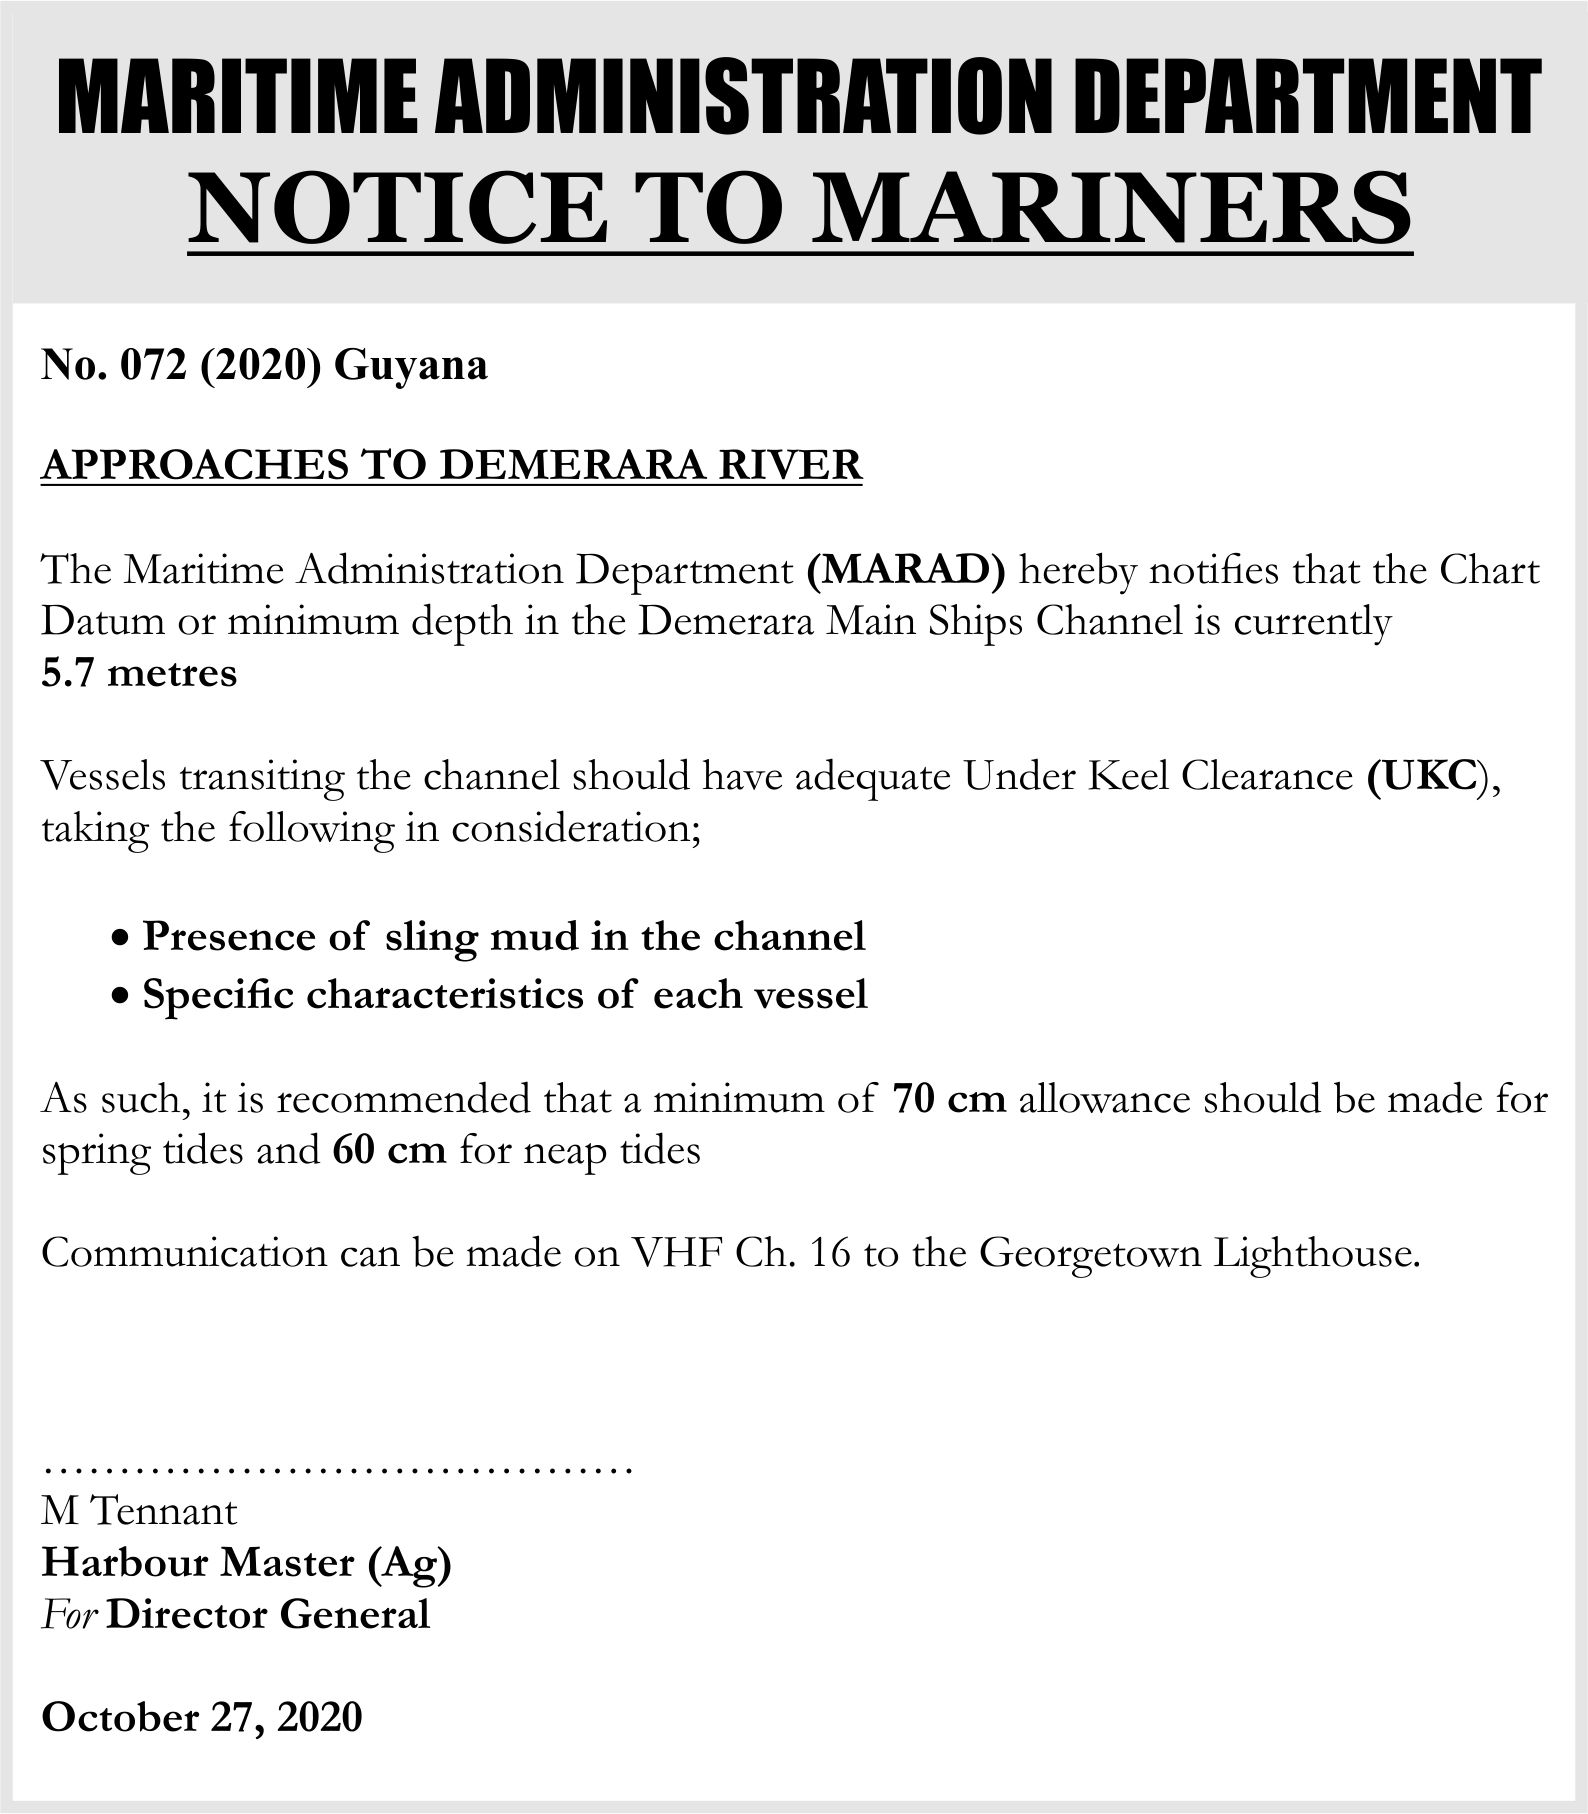 6in x 3col Maritime Administration Department – Notice to Mariners 72